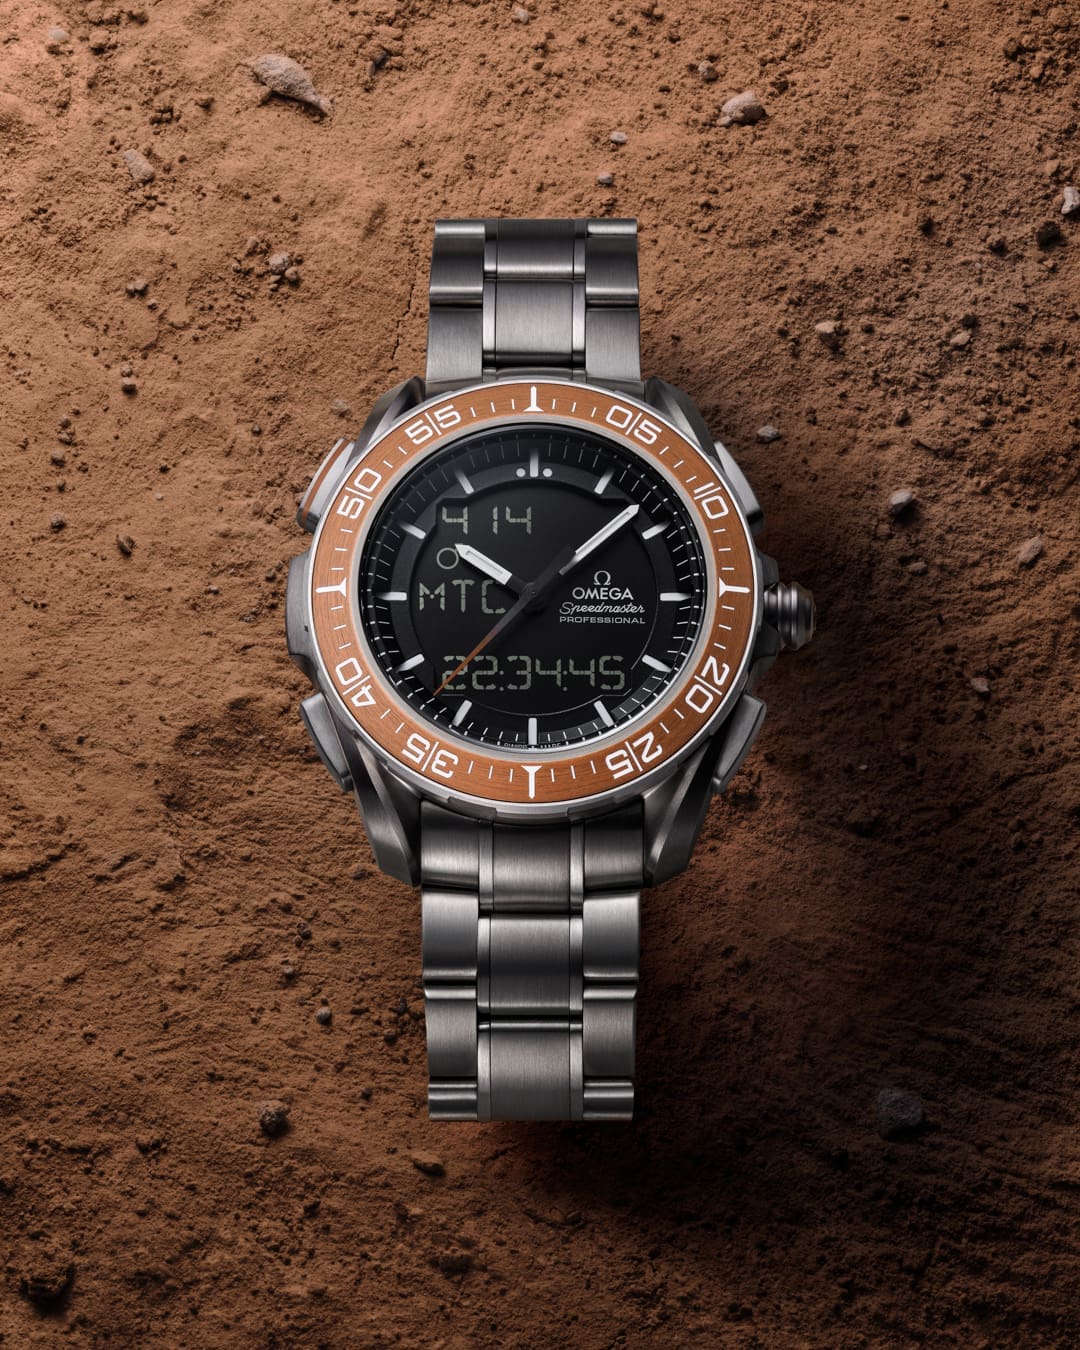 Earth Attacks! The new Omega Speedmaster X-33 Marstimer is ready to blast off for the red planet